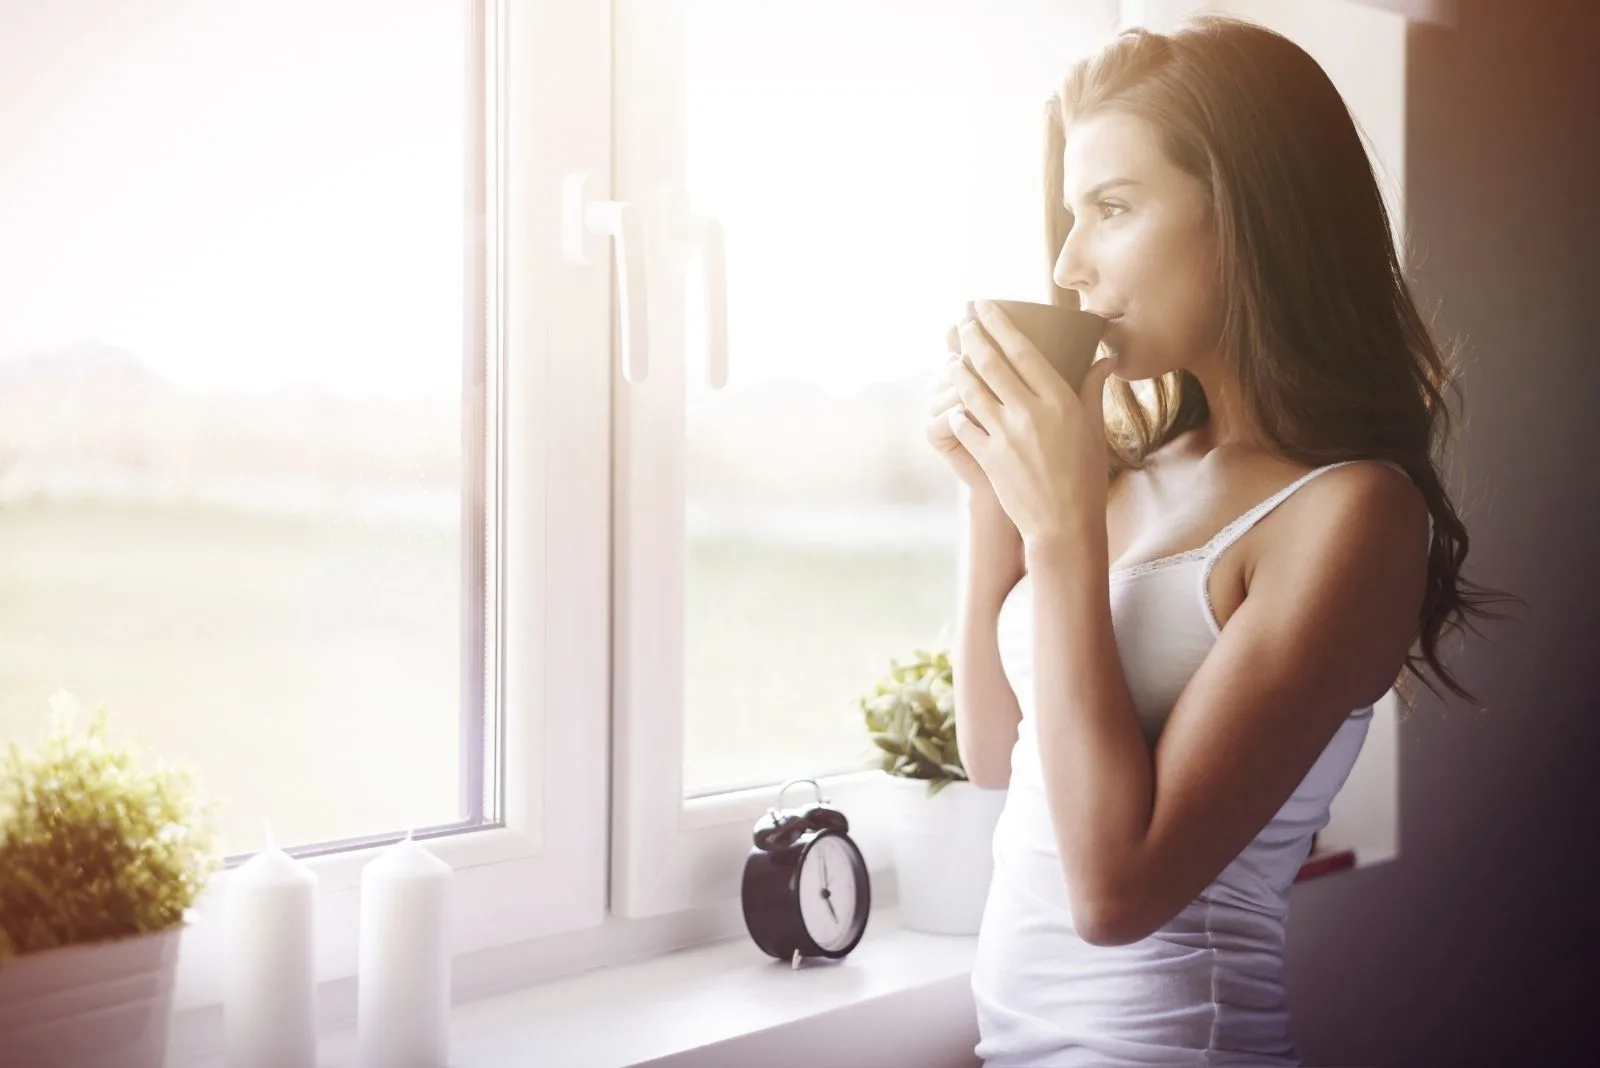 woman drinking coffee looking outside the window with an alarm clock nearby